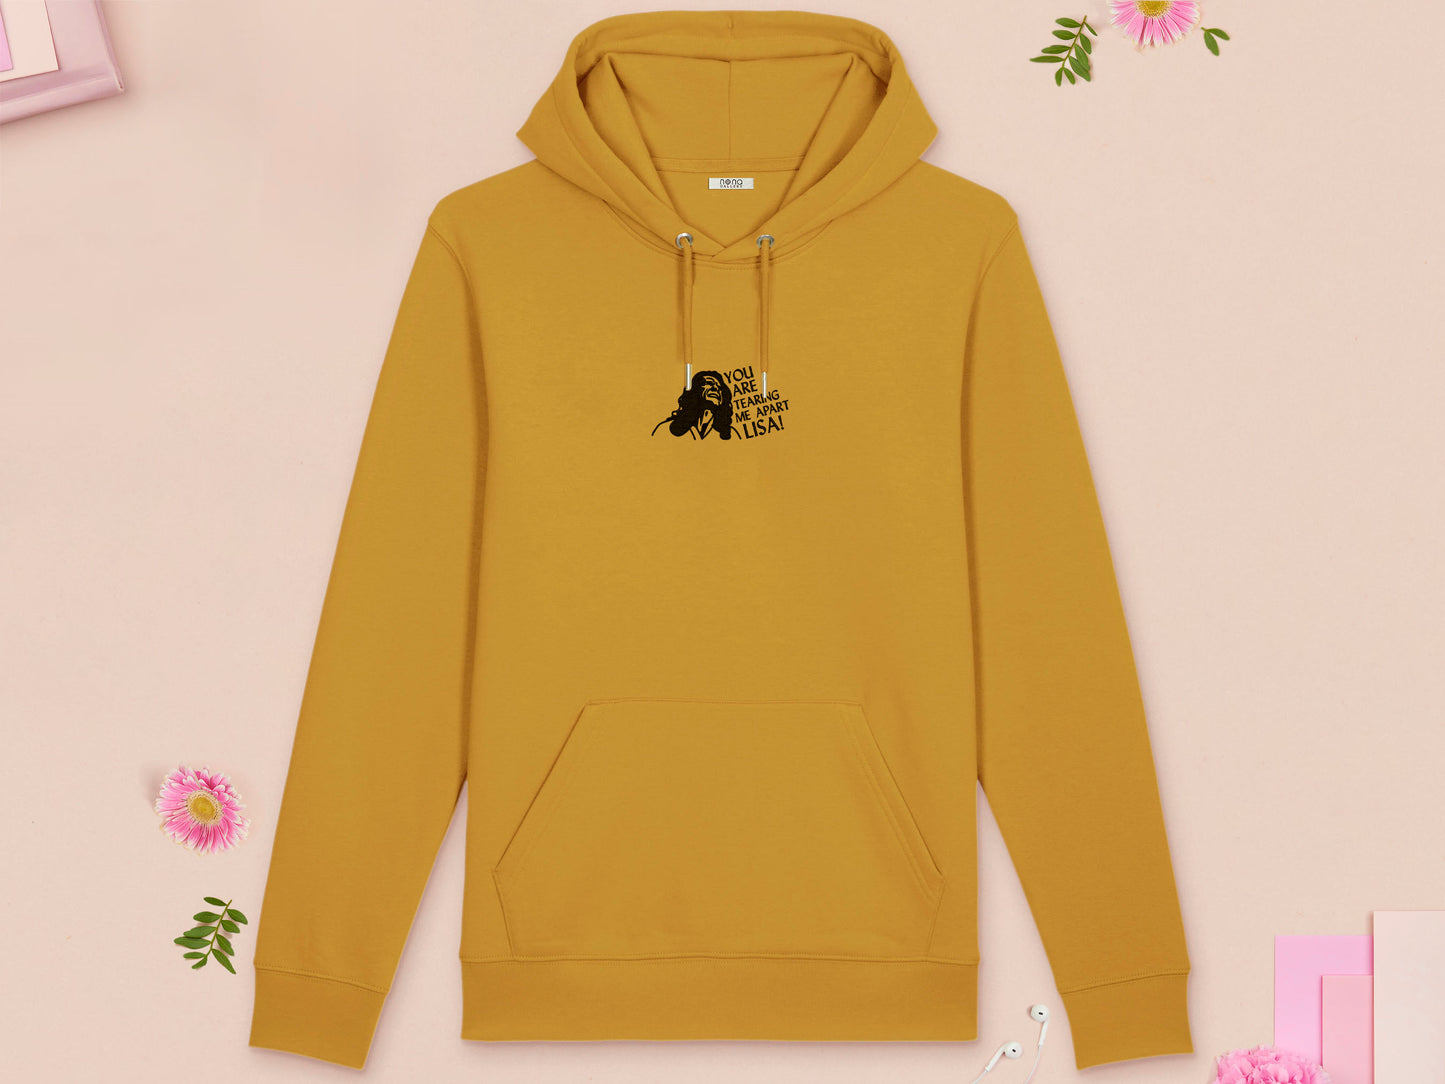 A long sleeved yellow fleece hoodie with an embroidered black design of Tommy Wiseau in the movie The Room with the quote You Are Tearing Me Apart Lisa!